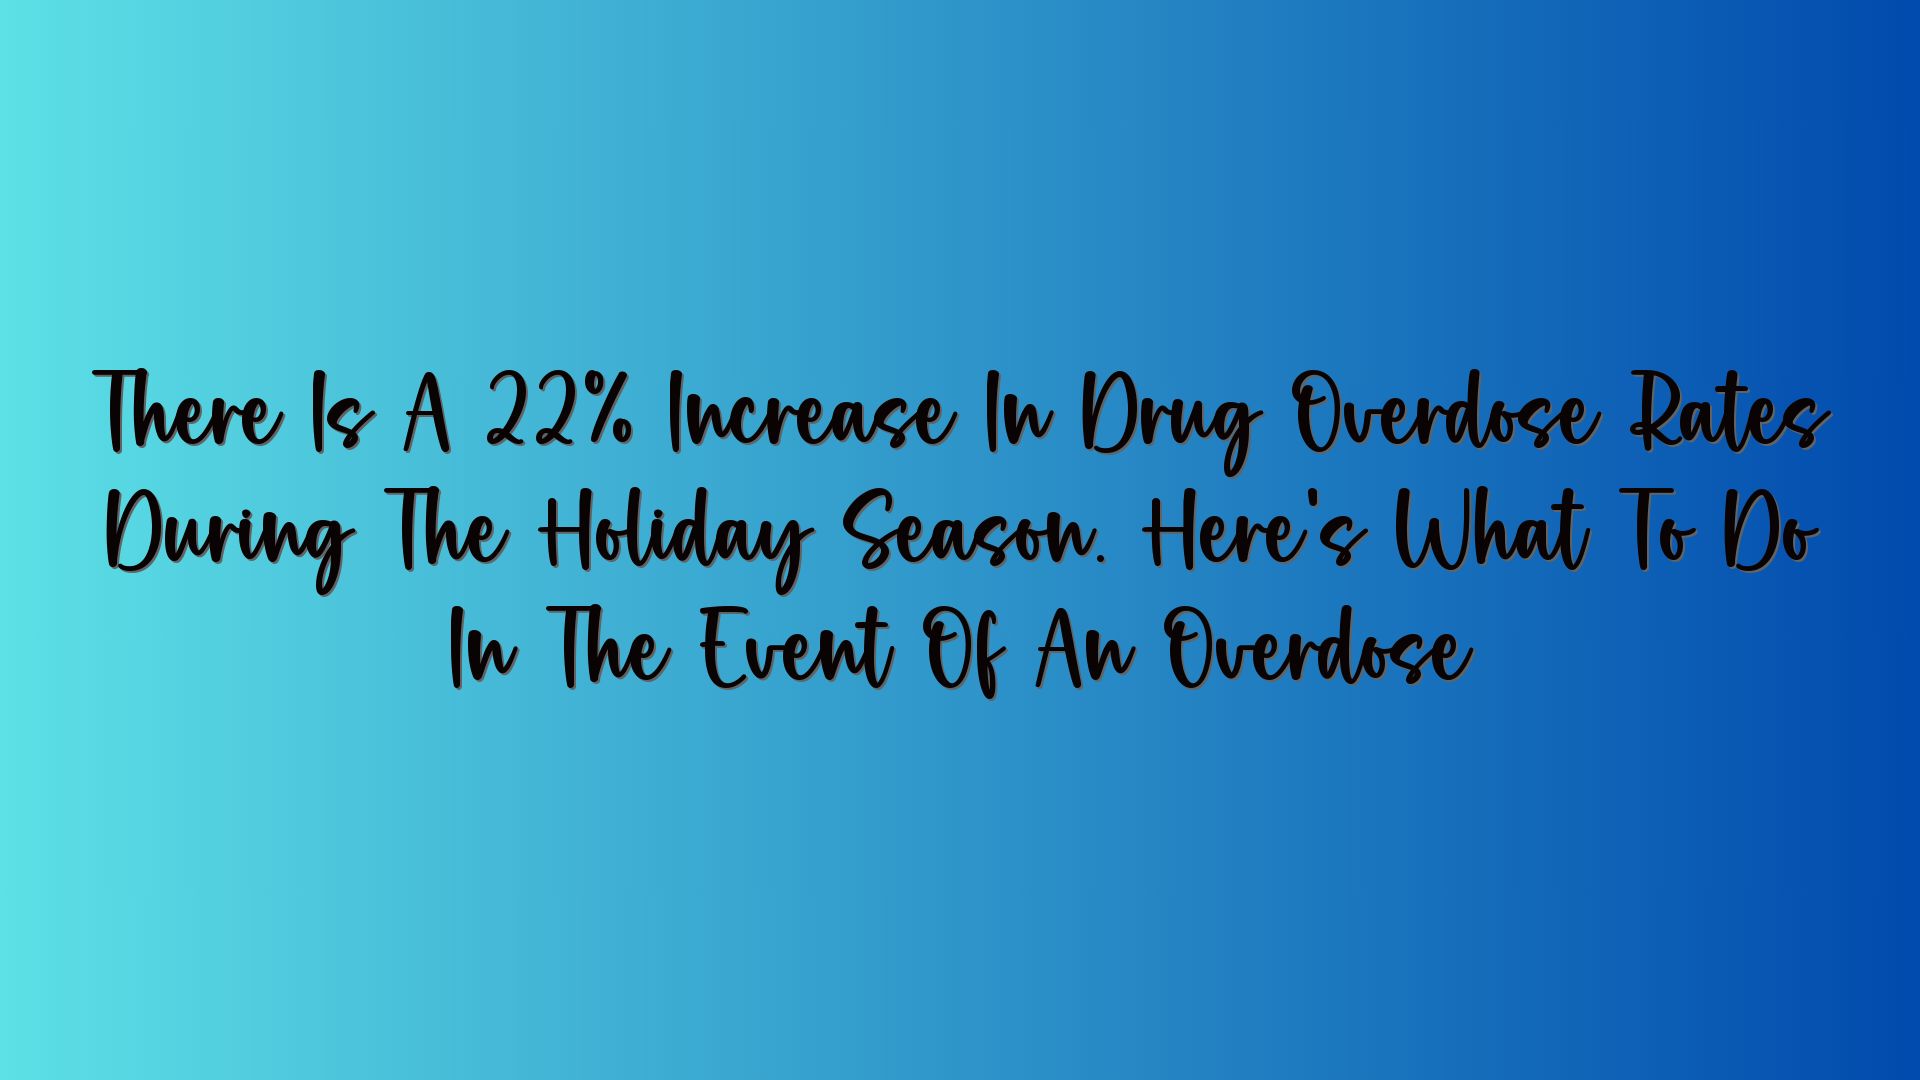 There Is A 22% Increase In Drug Overdose Rates During The Holiday Season. Here’s What To Do In The Event Of An Overdose